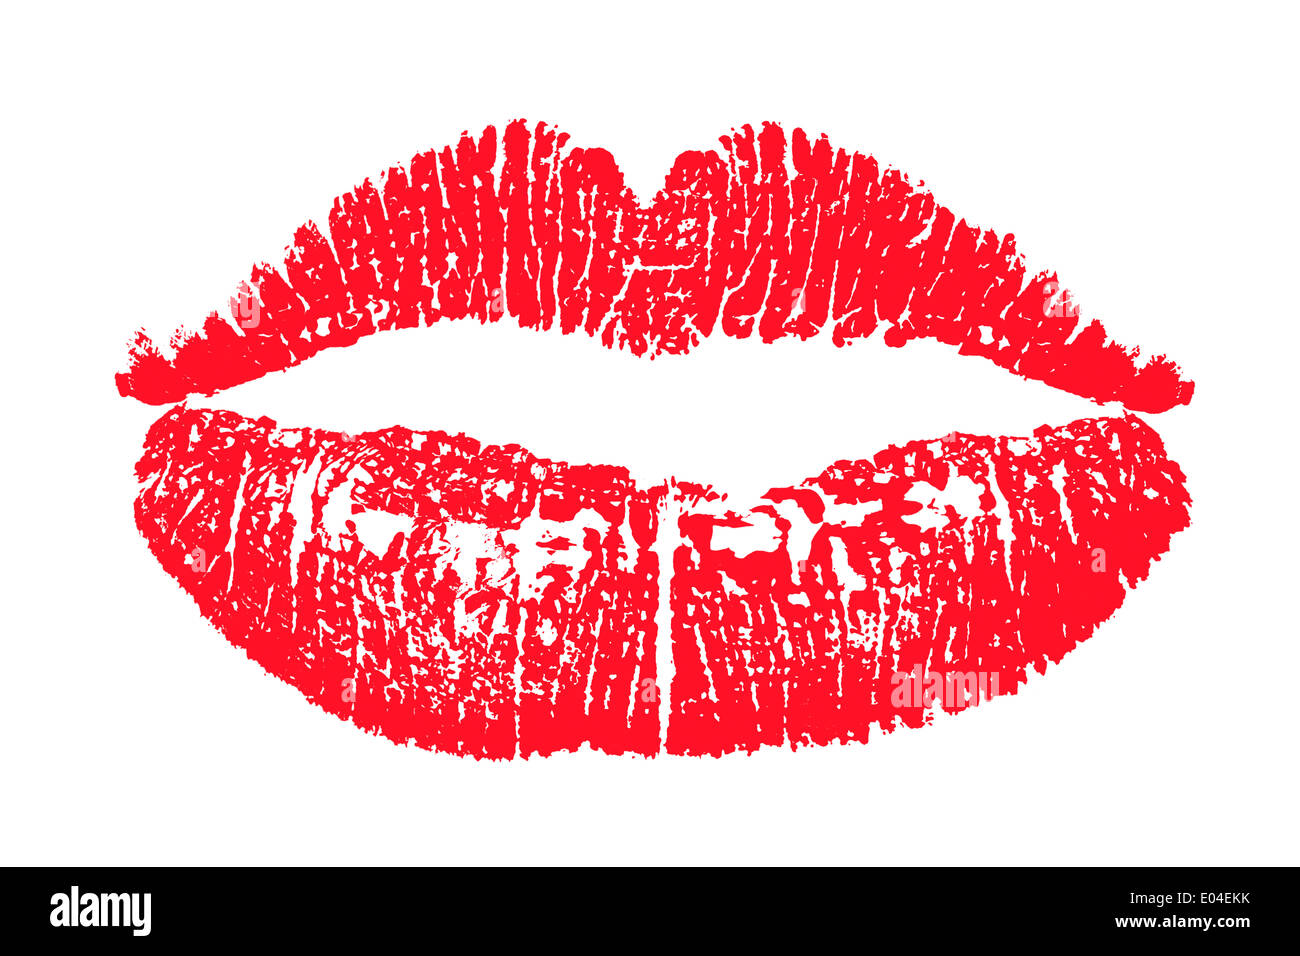 Red Lipstick Kiss Marks Isolated On White Background Stock Photo: 68940807 - Alamy